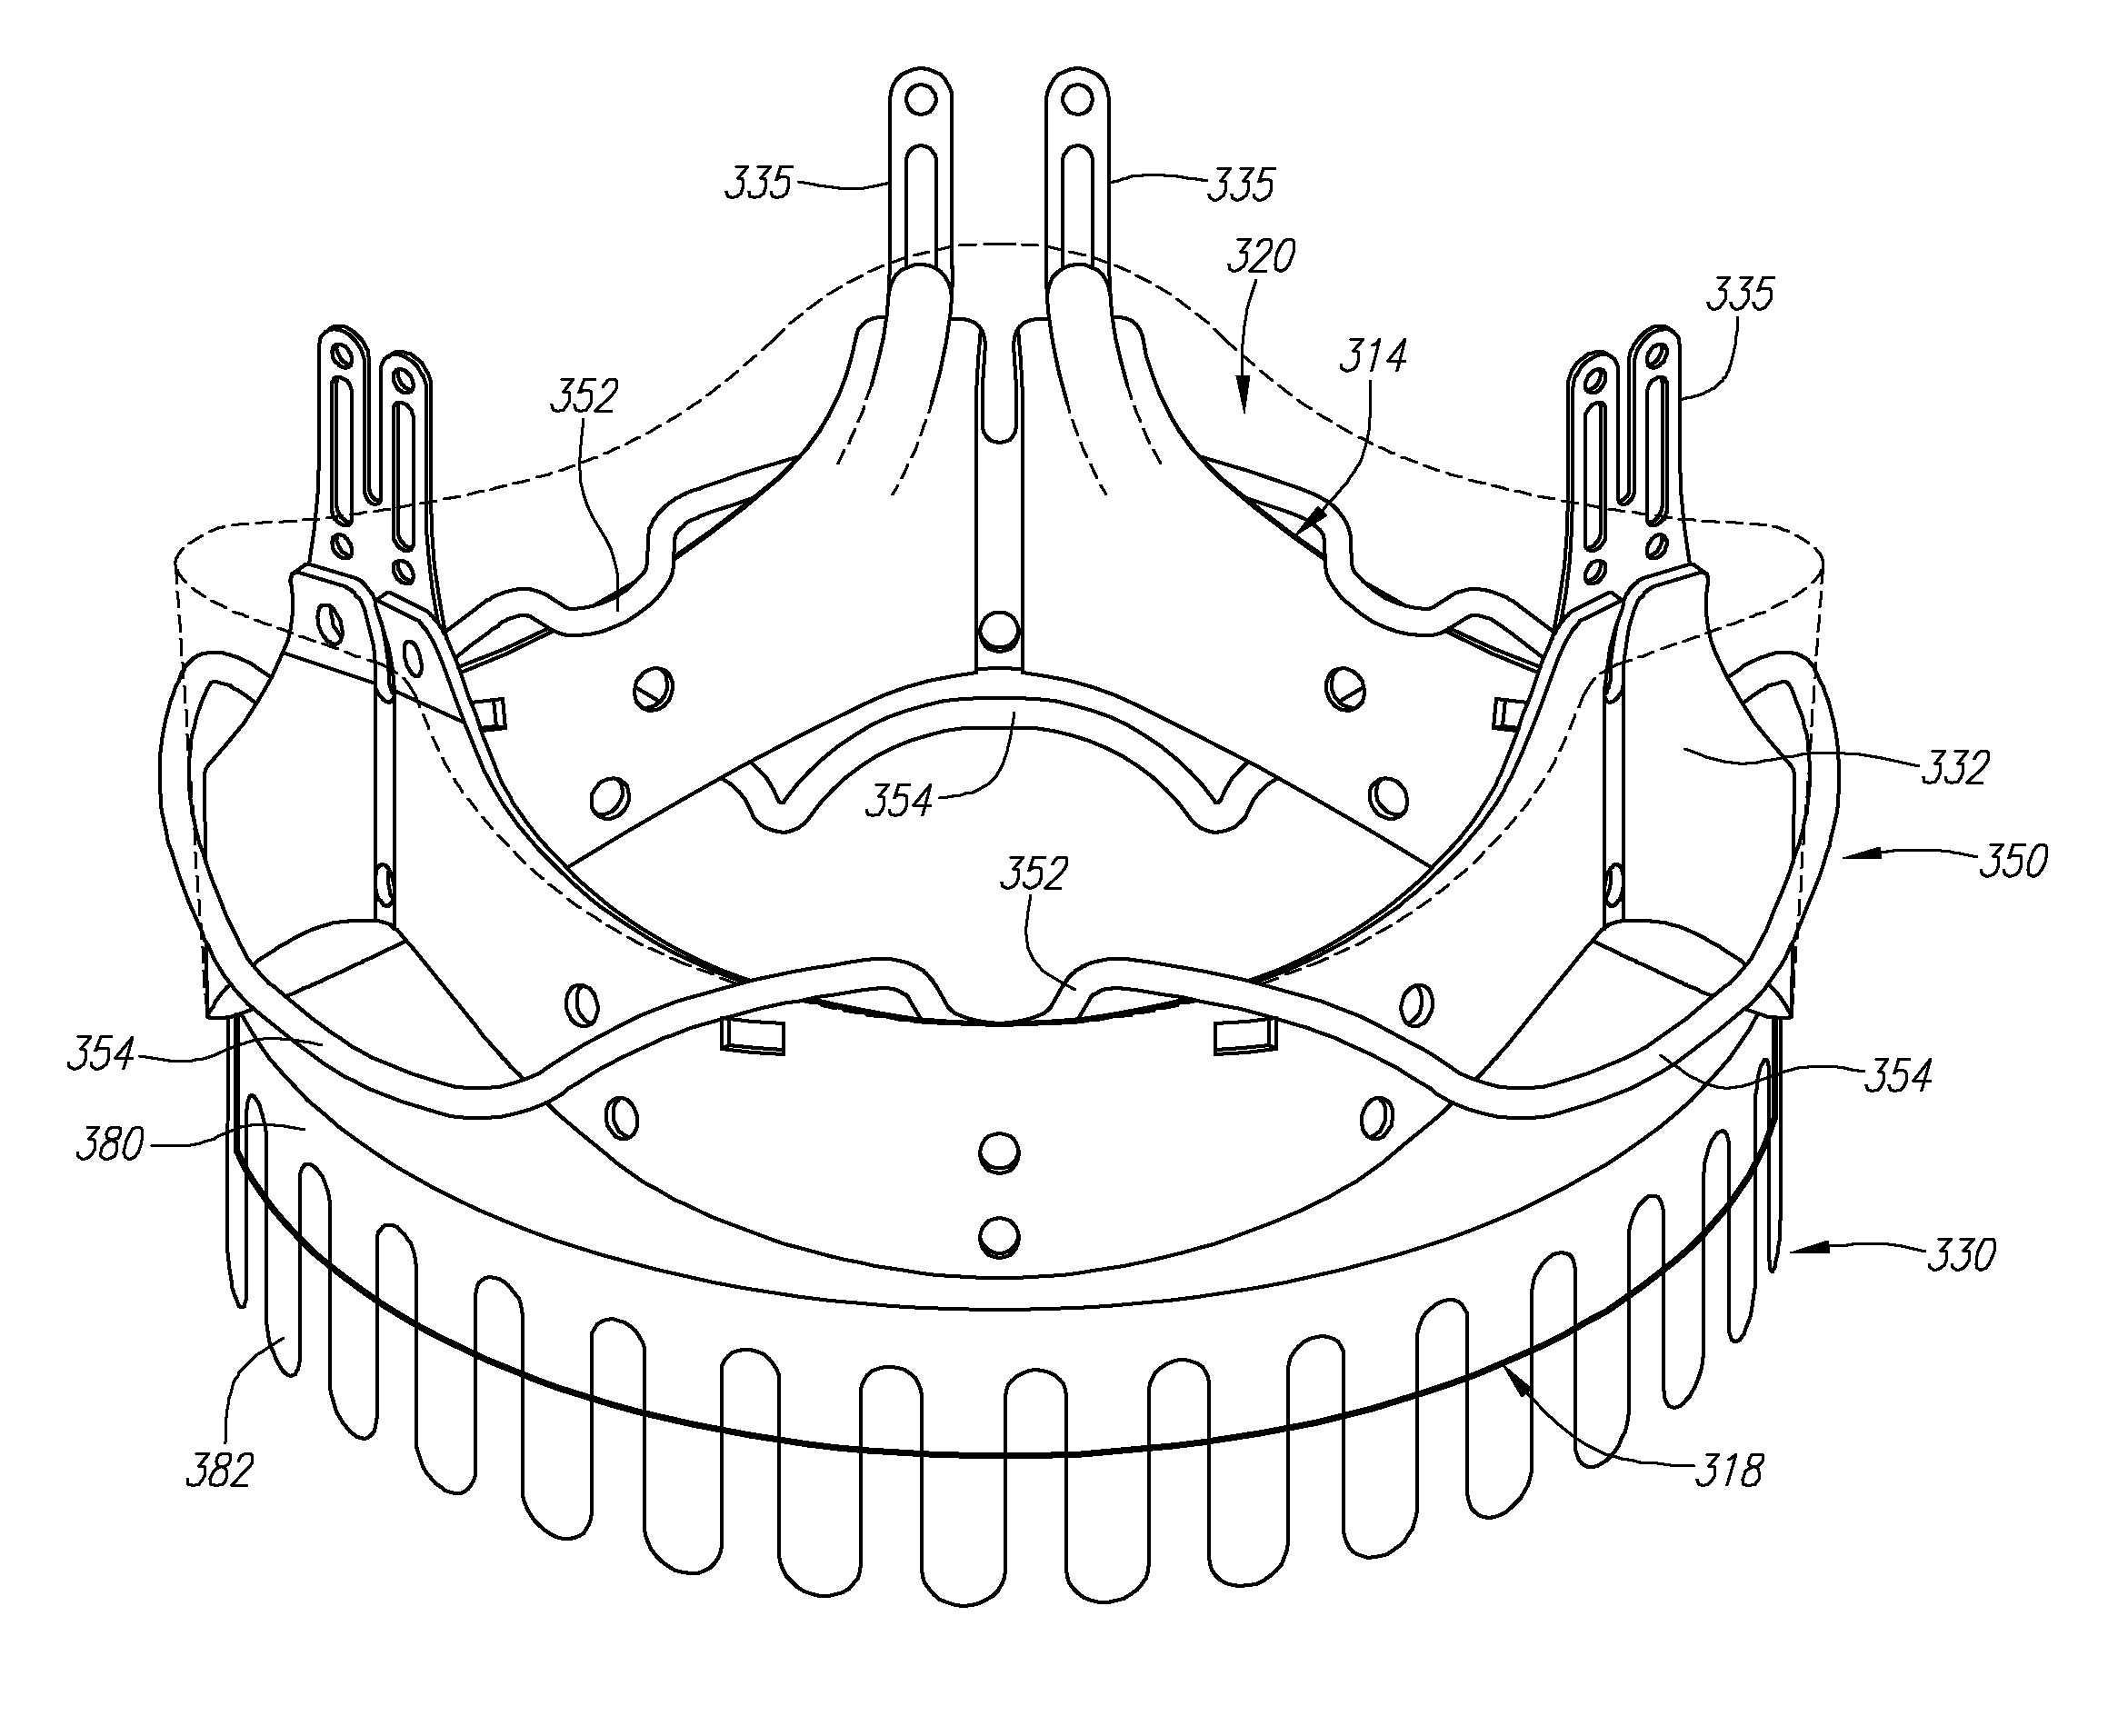 Conformable prosthesis for implanting two-piece heart valves and methods for using them